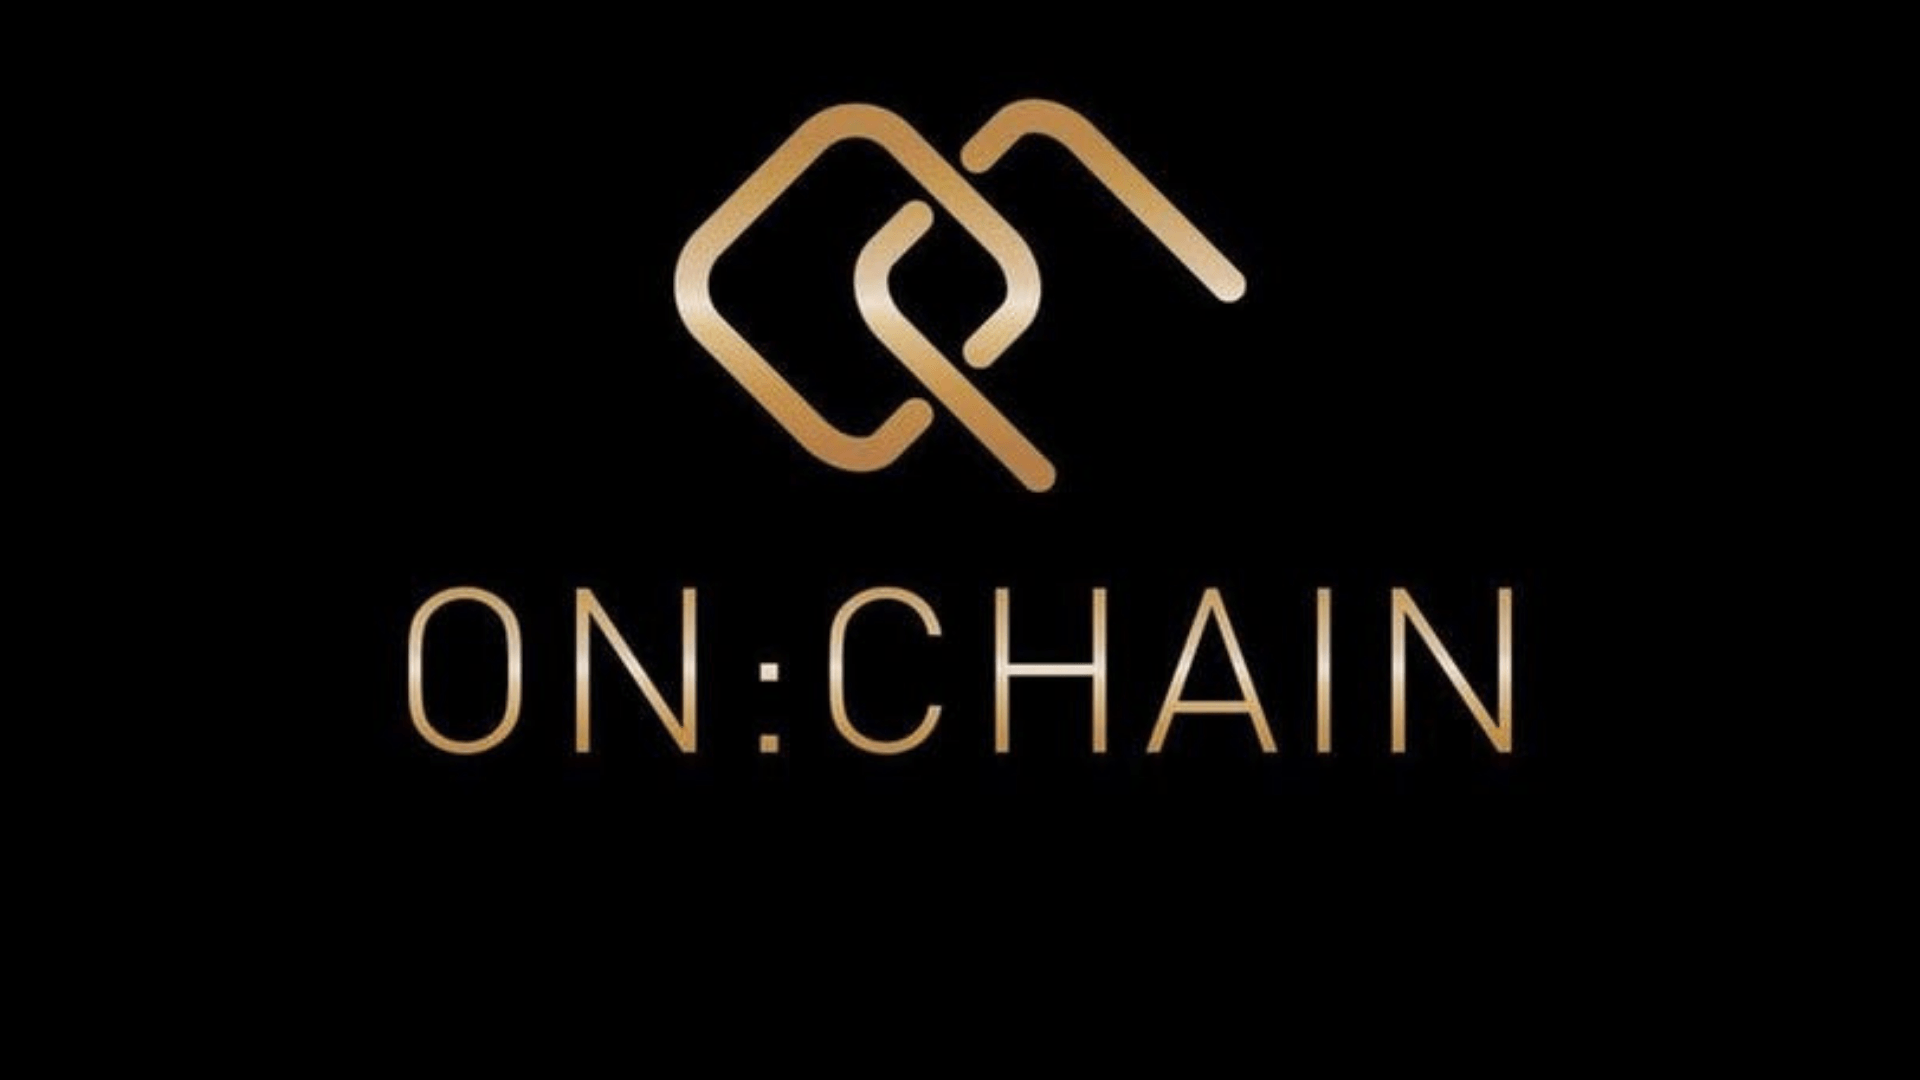 ON:chain19: A Top Blockchain Event to Add to Your Agenda